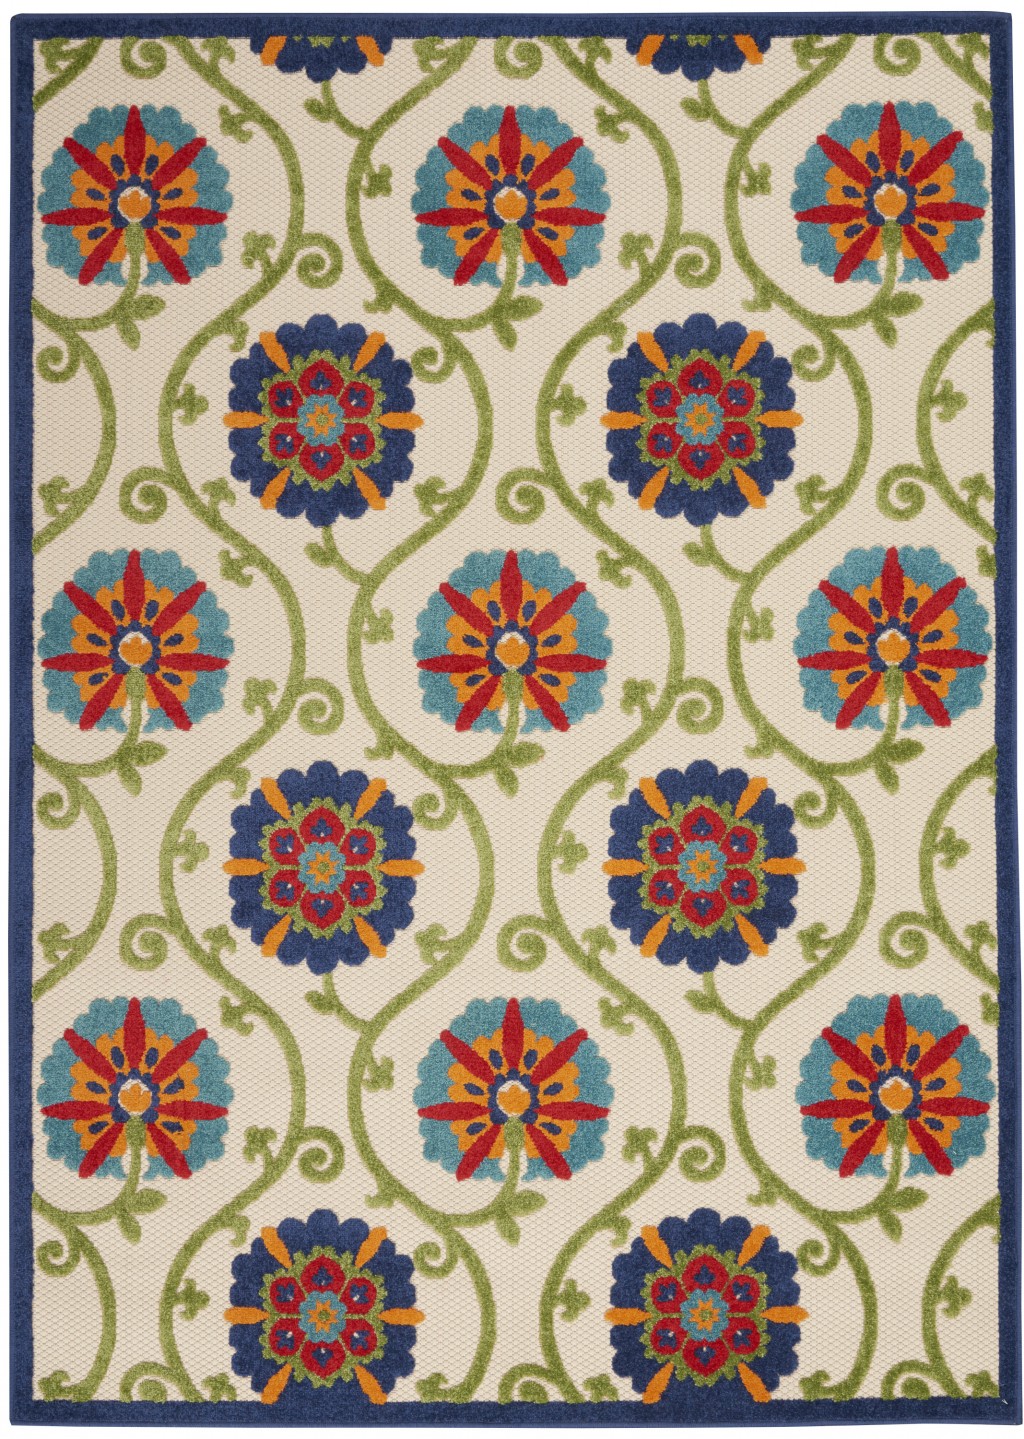 7' X 10' Ivory And Blue Floral Indoor Outdoor Area Rug-384976-1